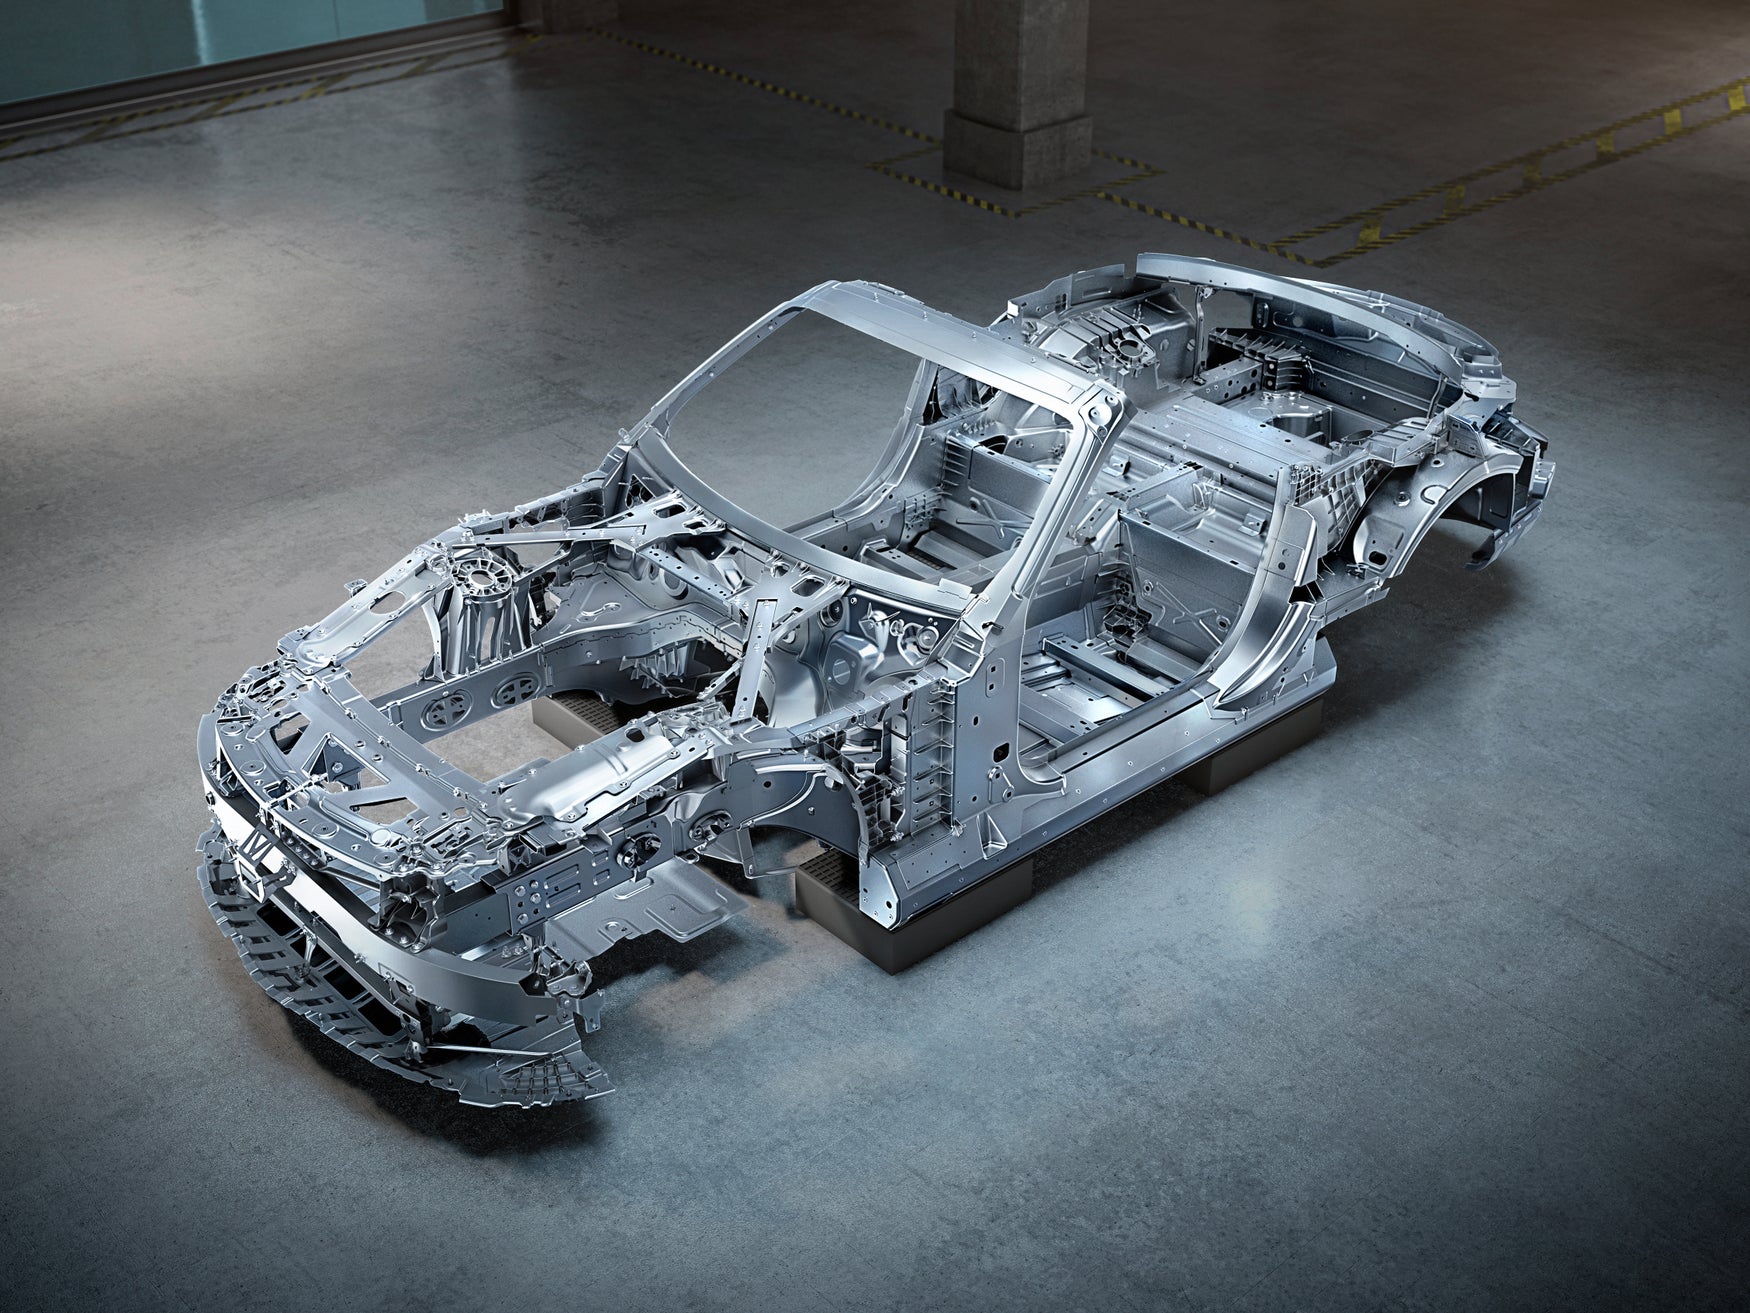 2021 Mercedes-Benz SL chassis